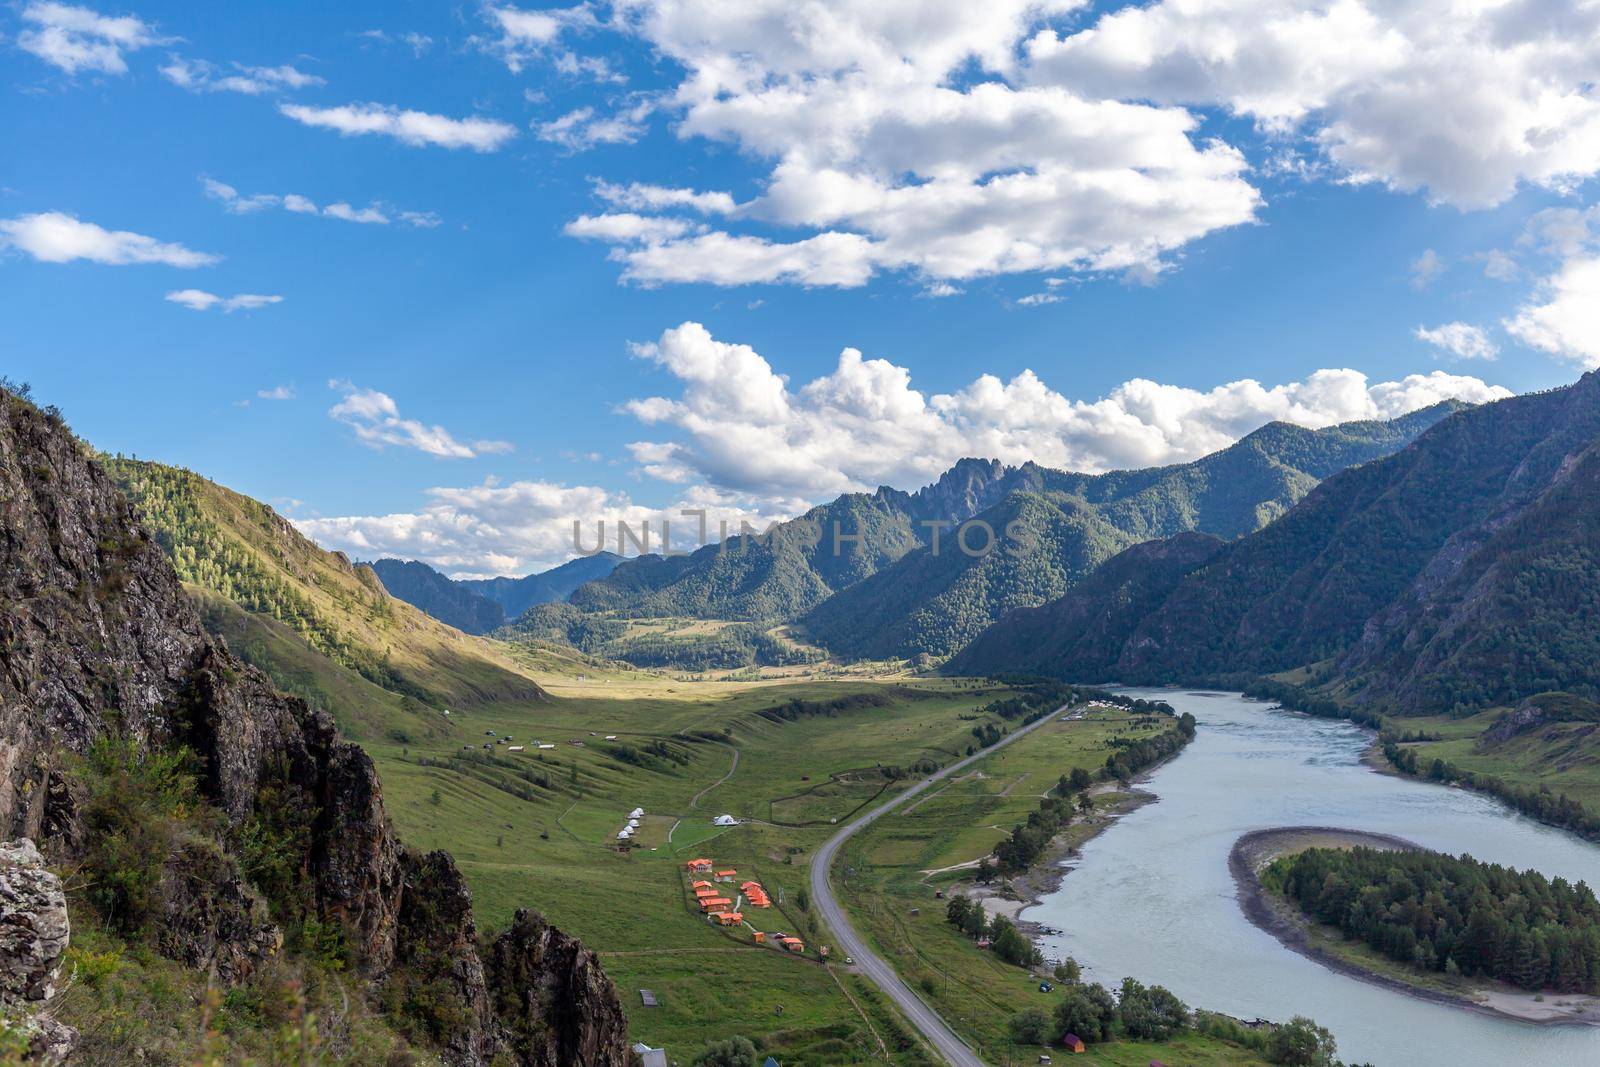 Colorful view of the mountains and the Katun River, with an island in the Altai Mountains, Siberia, Russia. View from the observation deck in the mountains. The concept of recreation and tourism